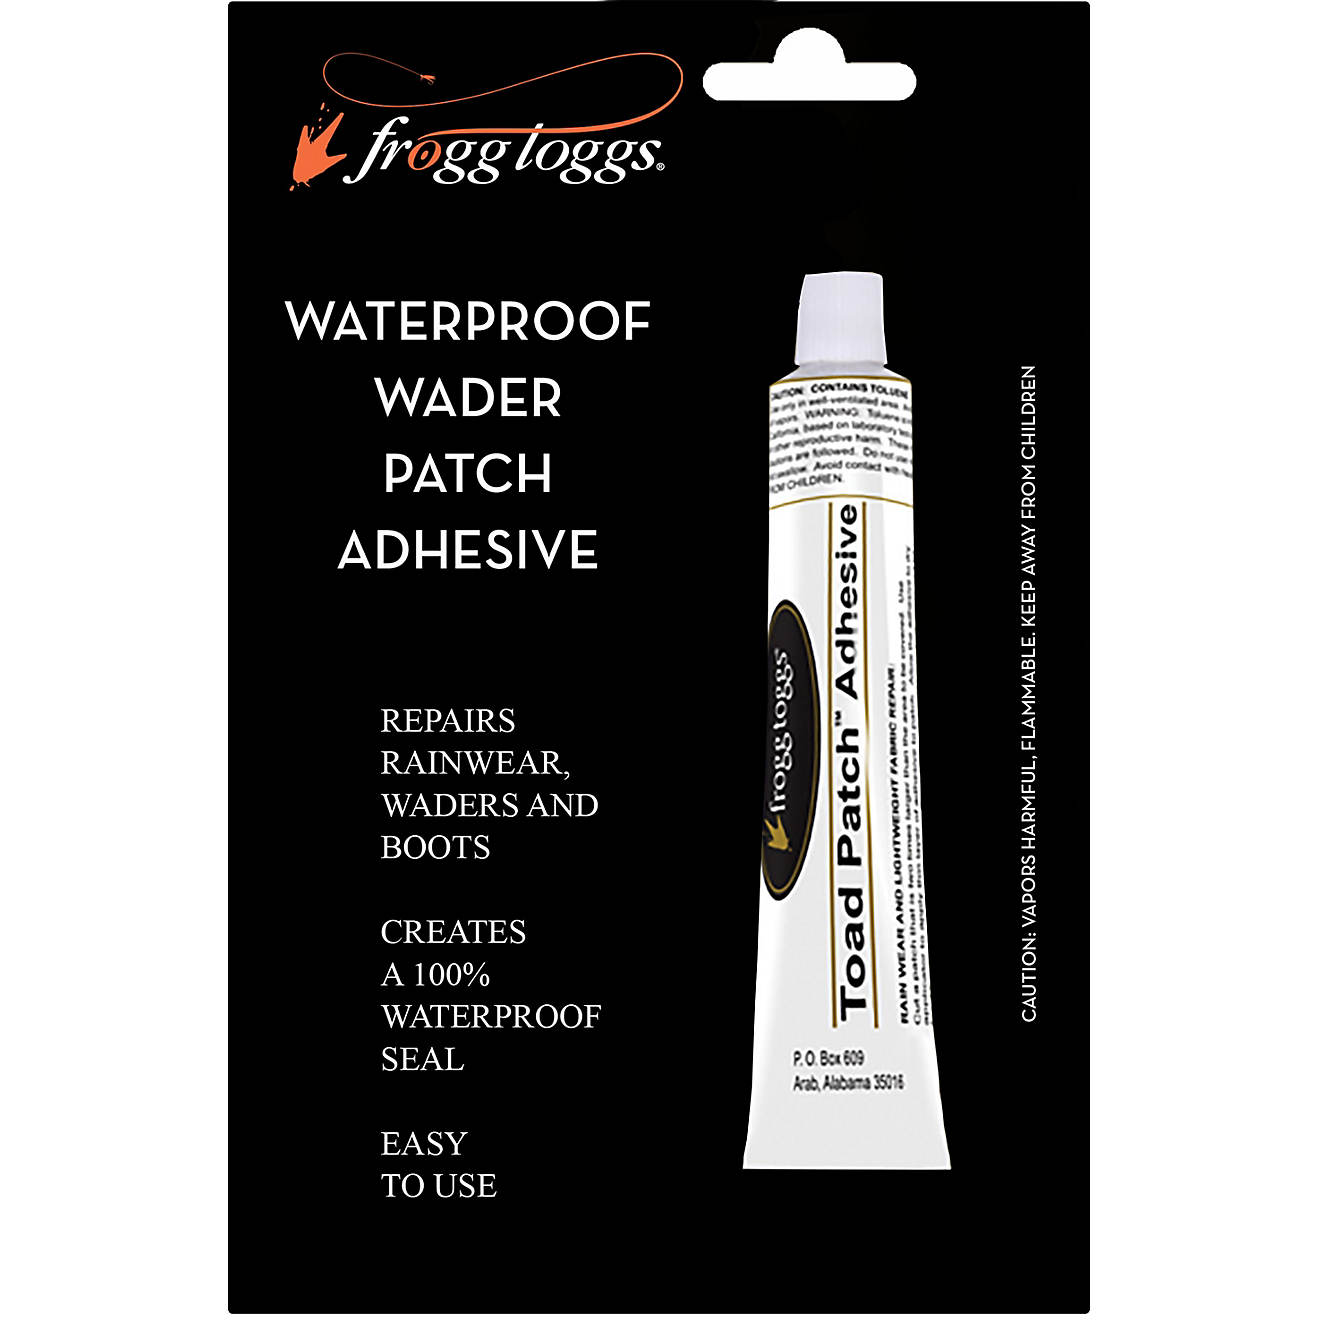 Frogg Toggs Waterproof Wader and Rain Wear Patch Adhesive 28201 for sale online 